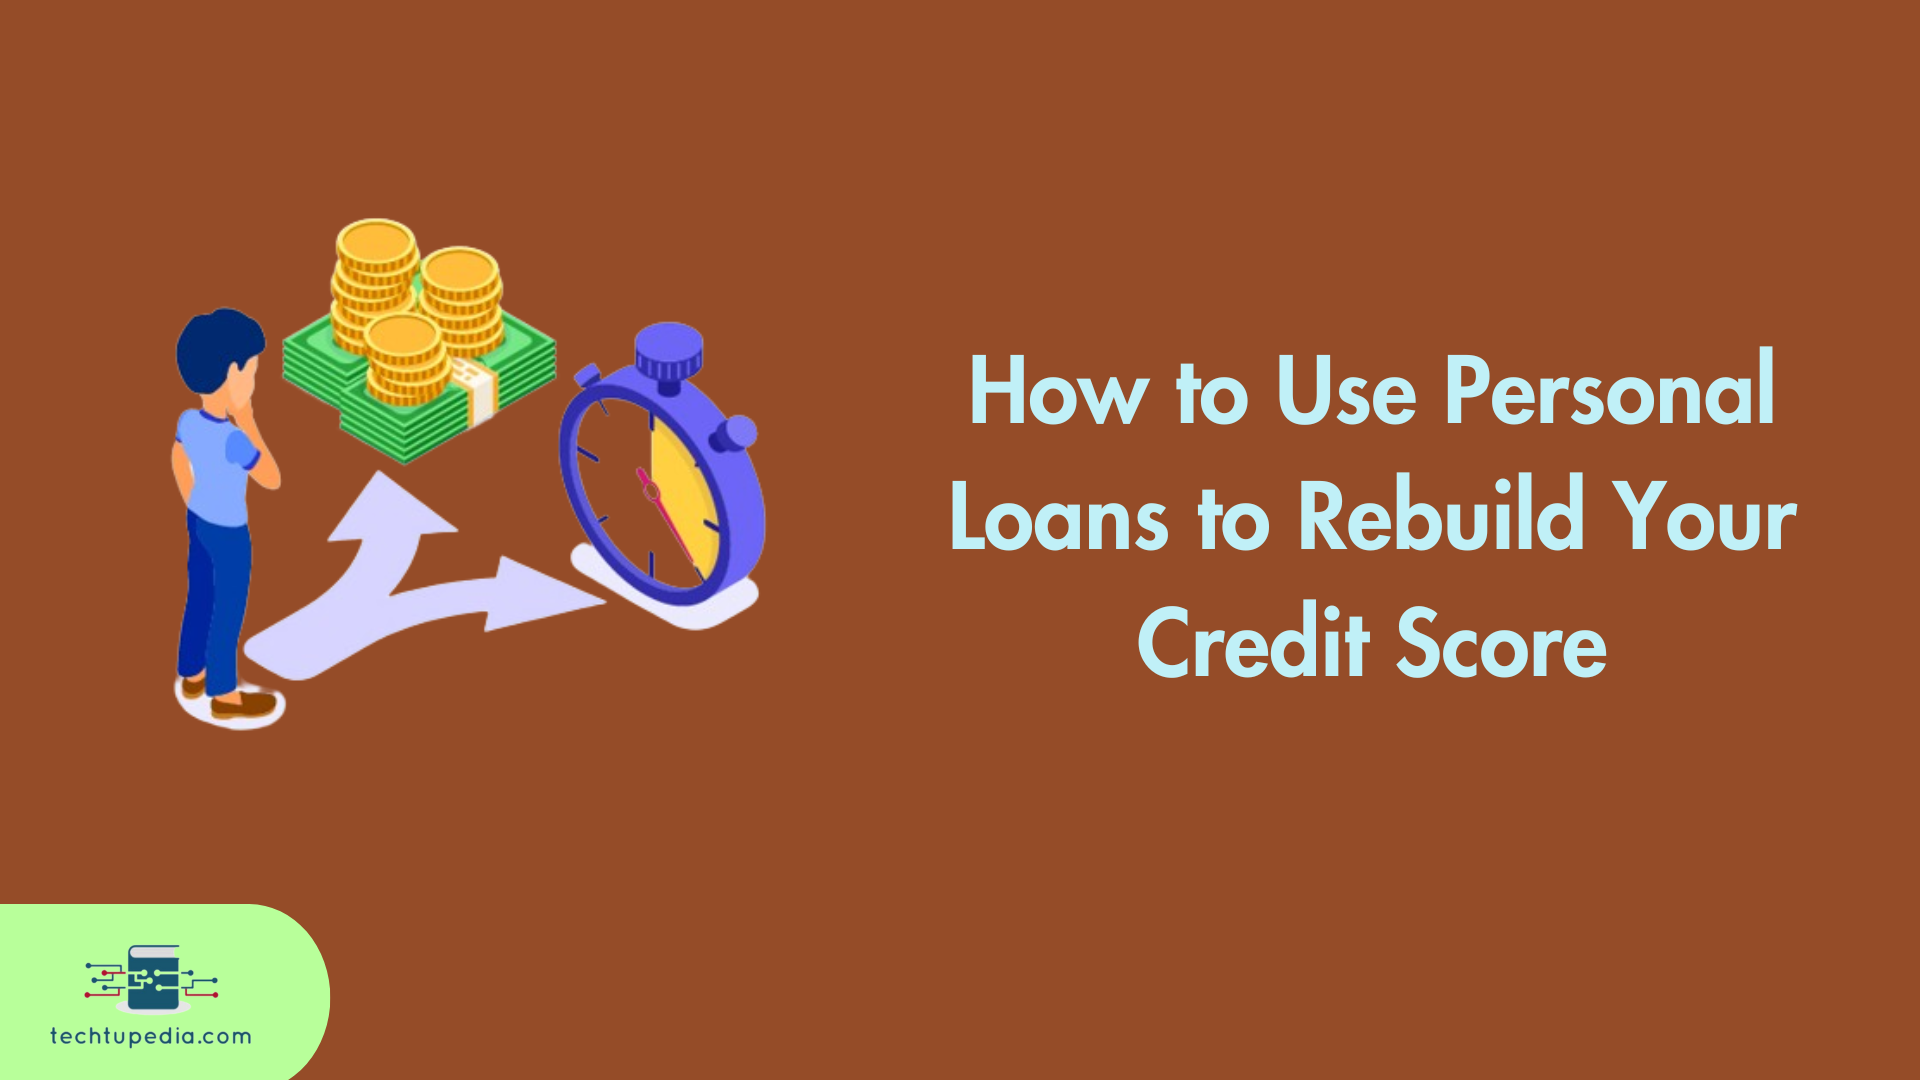 How to Use Personal Loans to Rebuild Your Credit Score